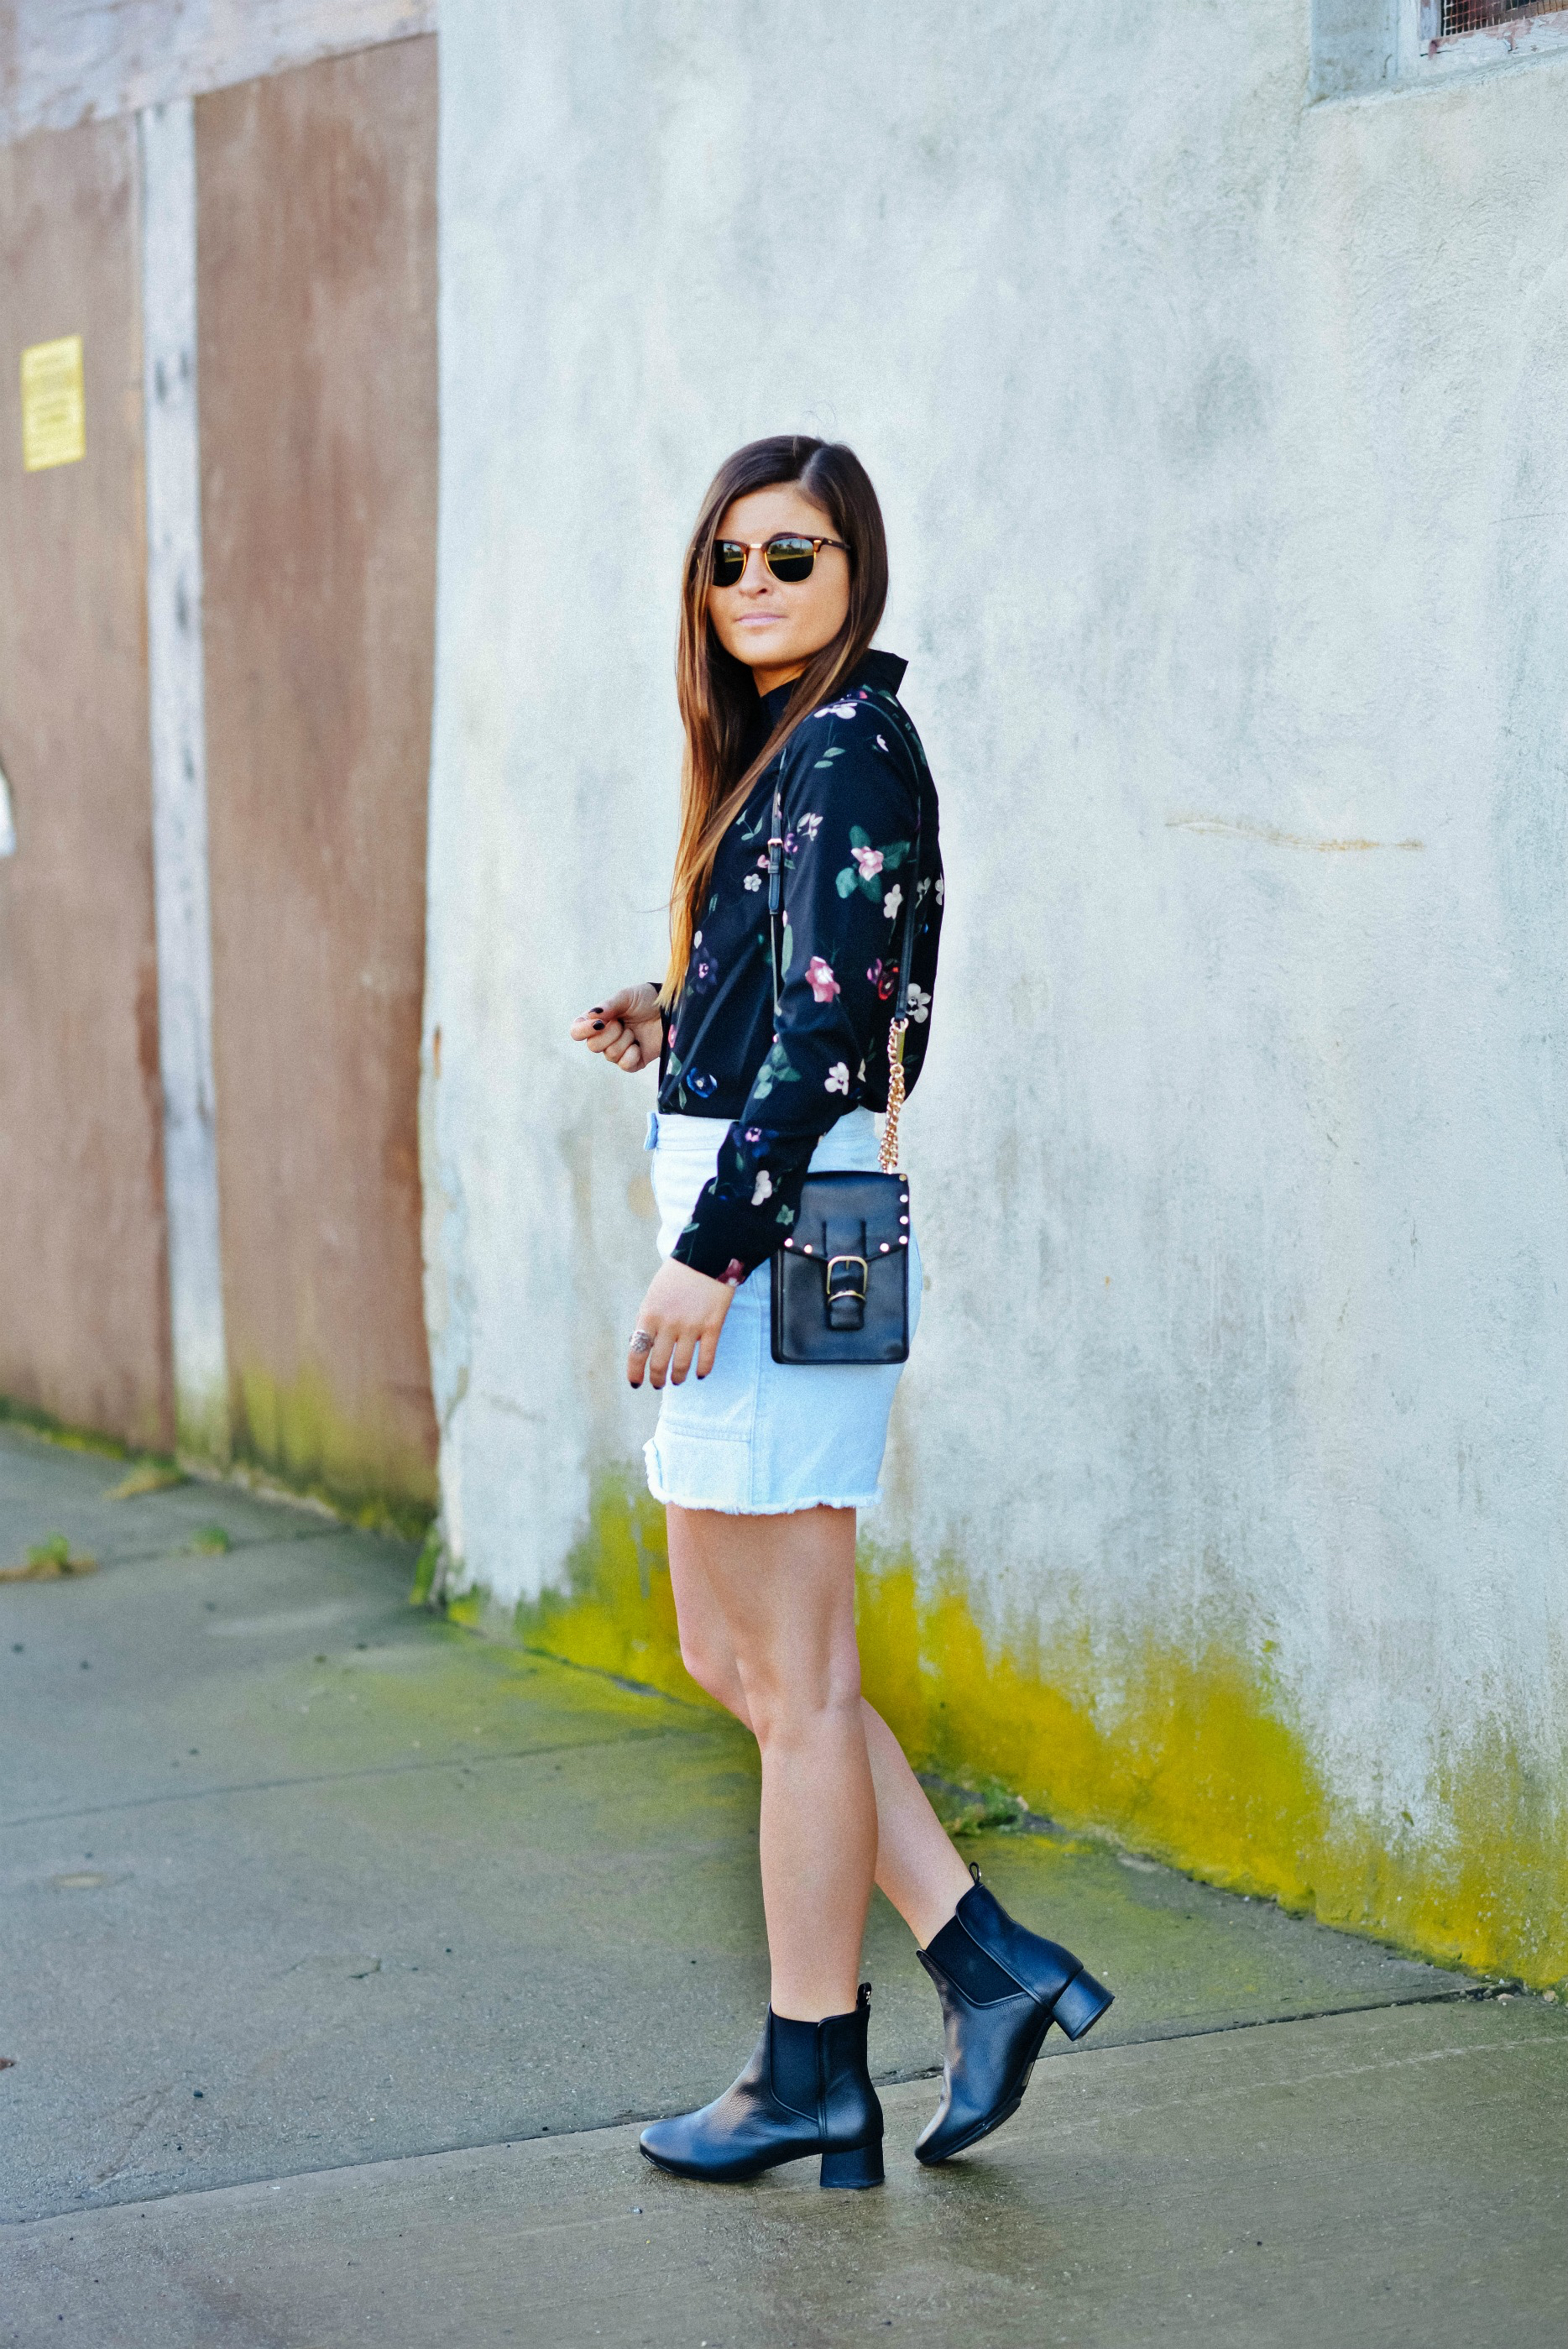 Fall Outfit Inspiration, Denim Skirt, Floral Blouse, Black Chelsea Boots, Tilden of To Be Bright